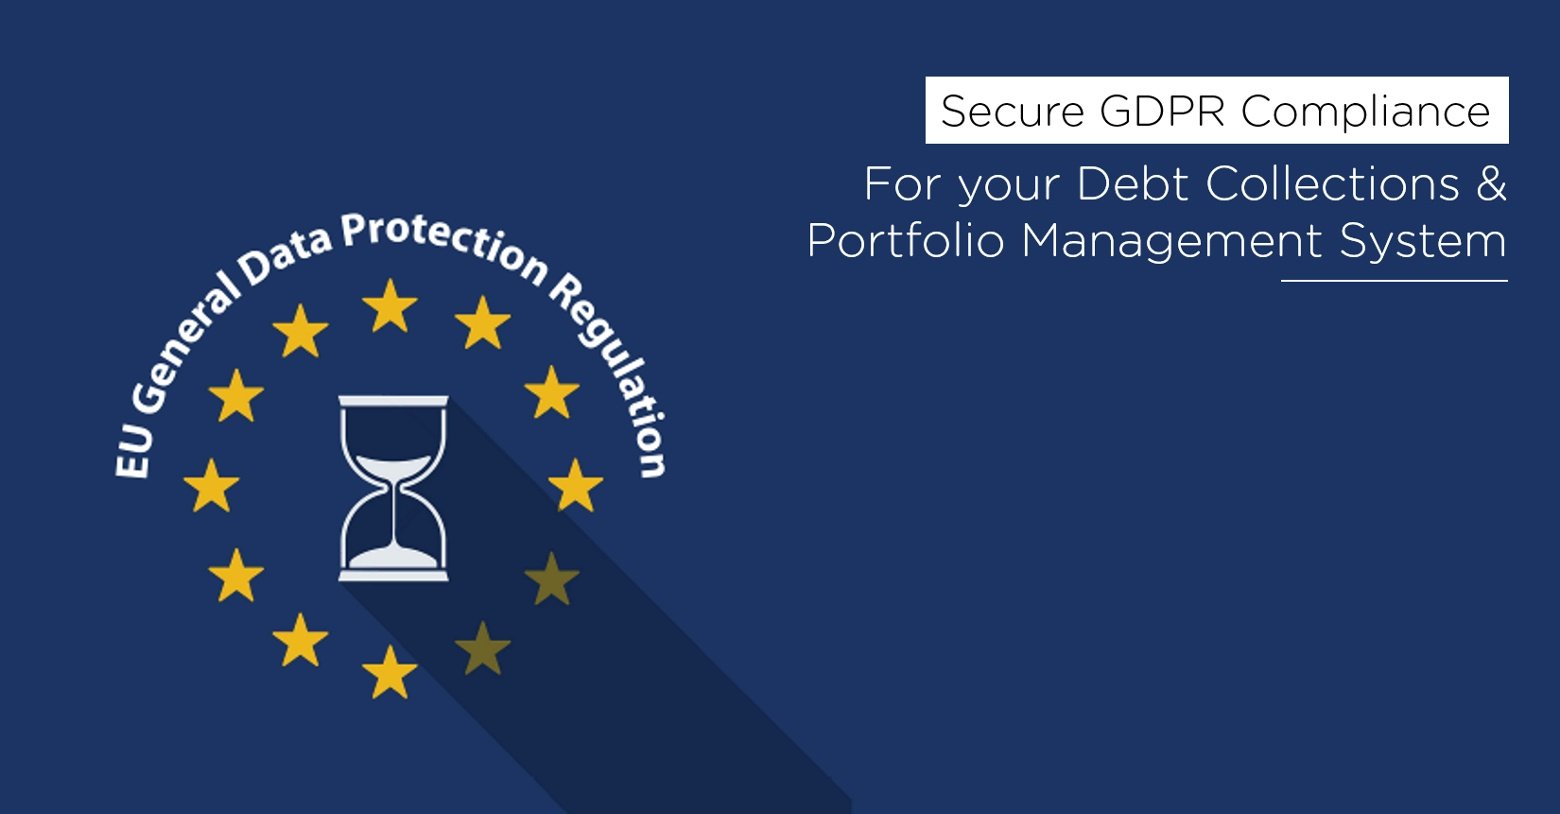 Is your Debt Collections and Portfolio management system GDPR compliant?